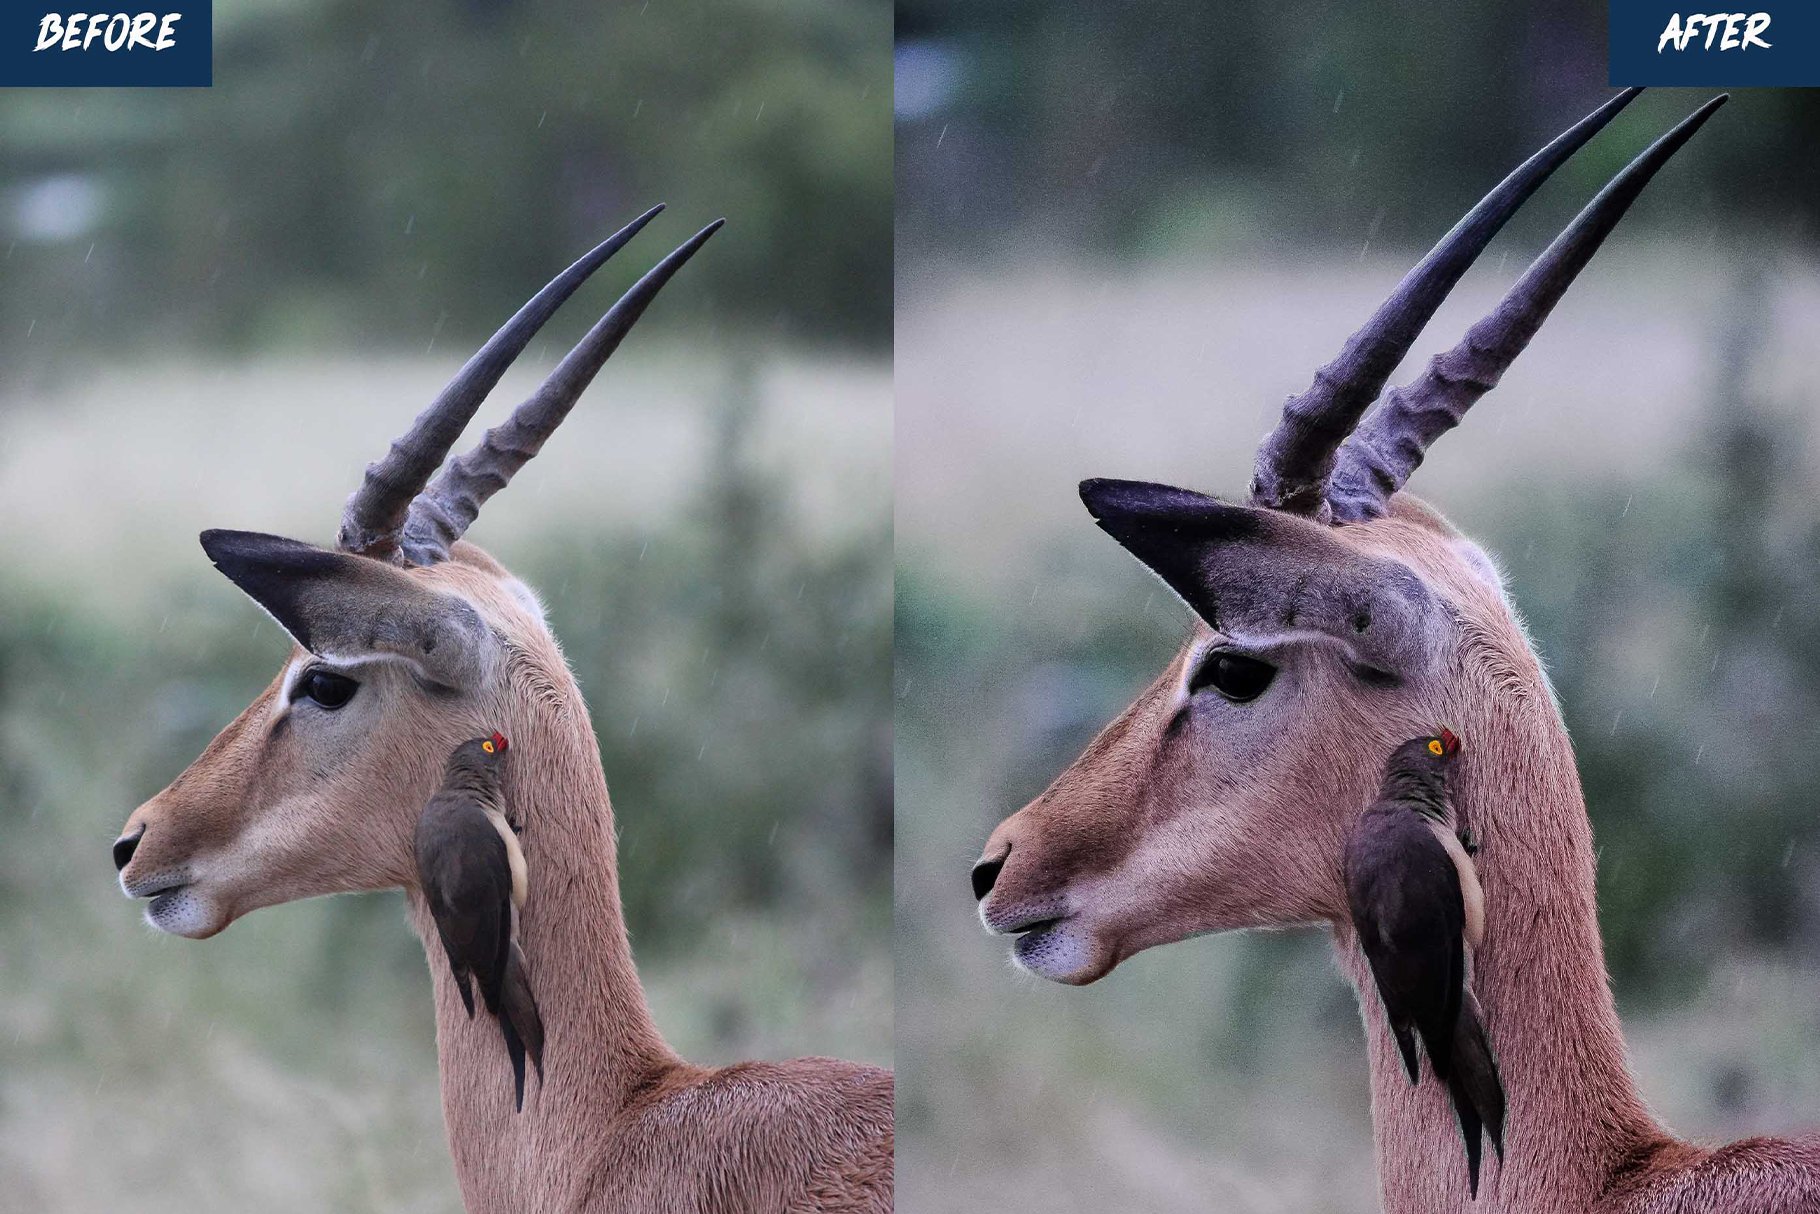 wildlife presets before after 02 958